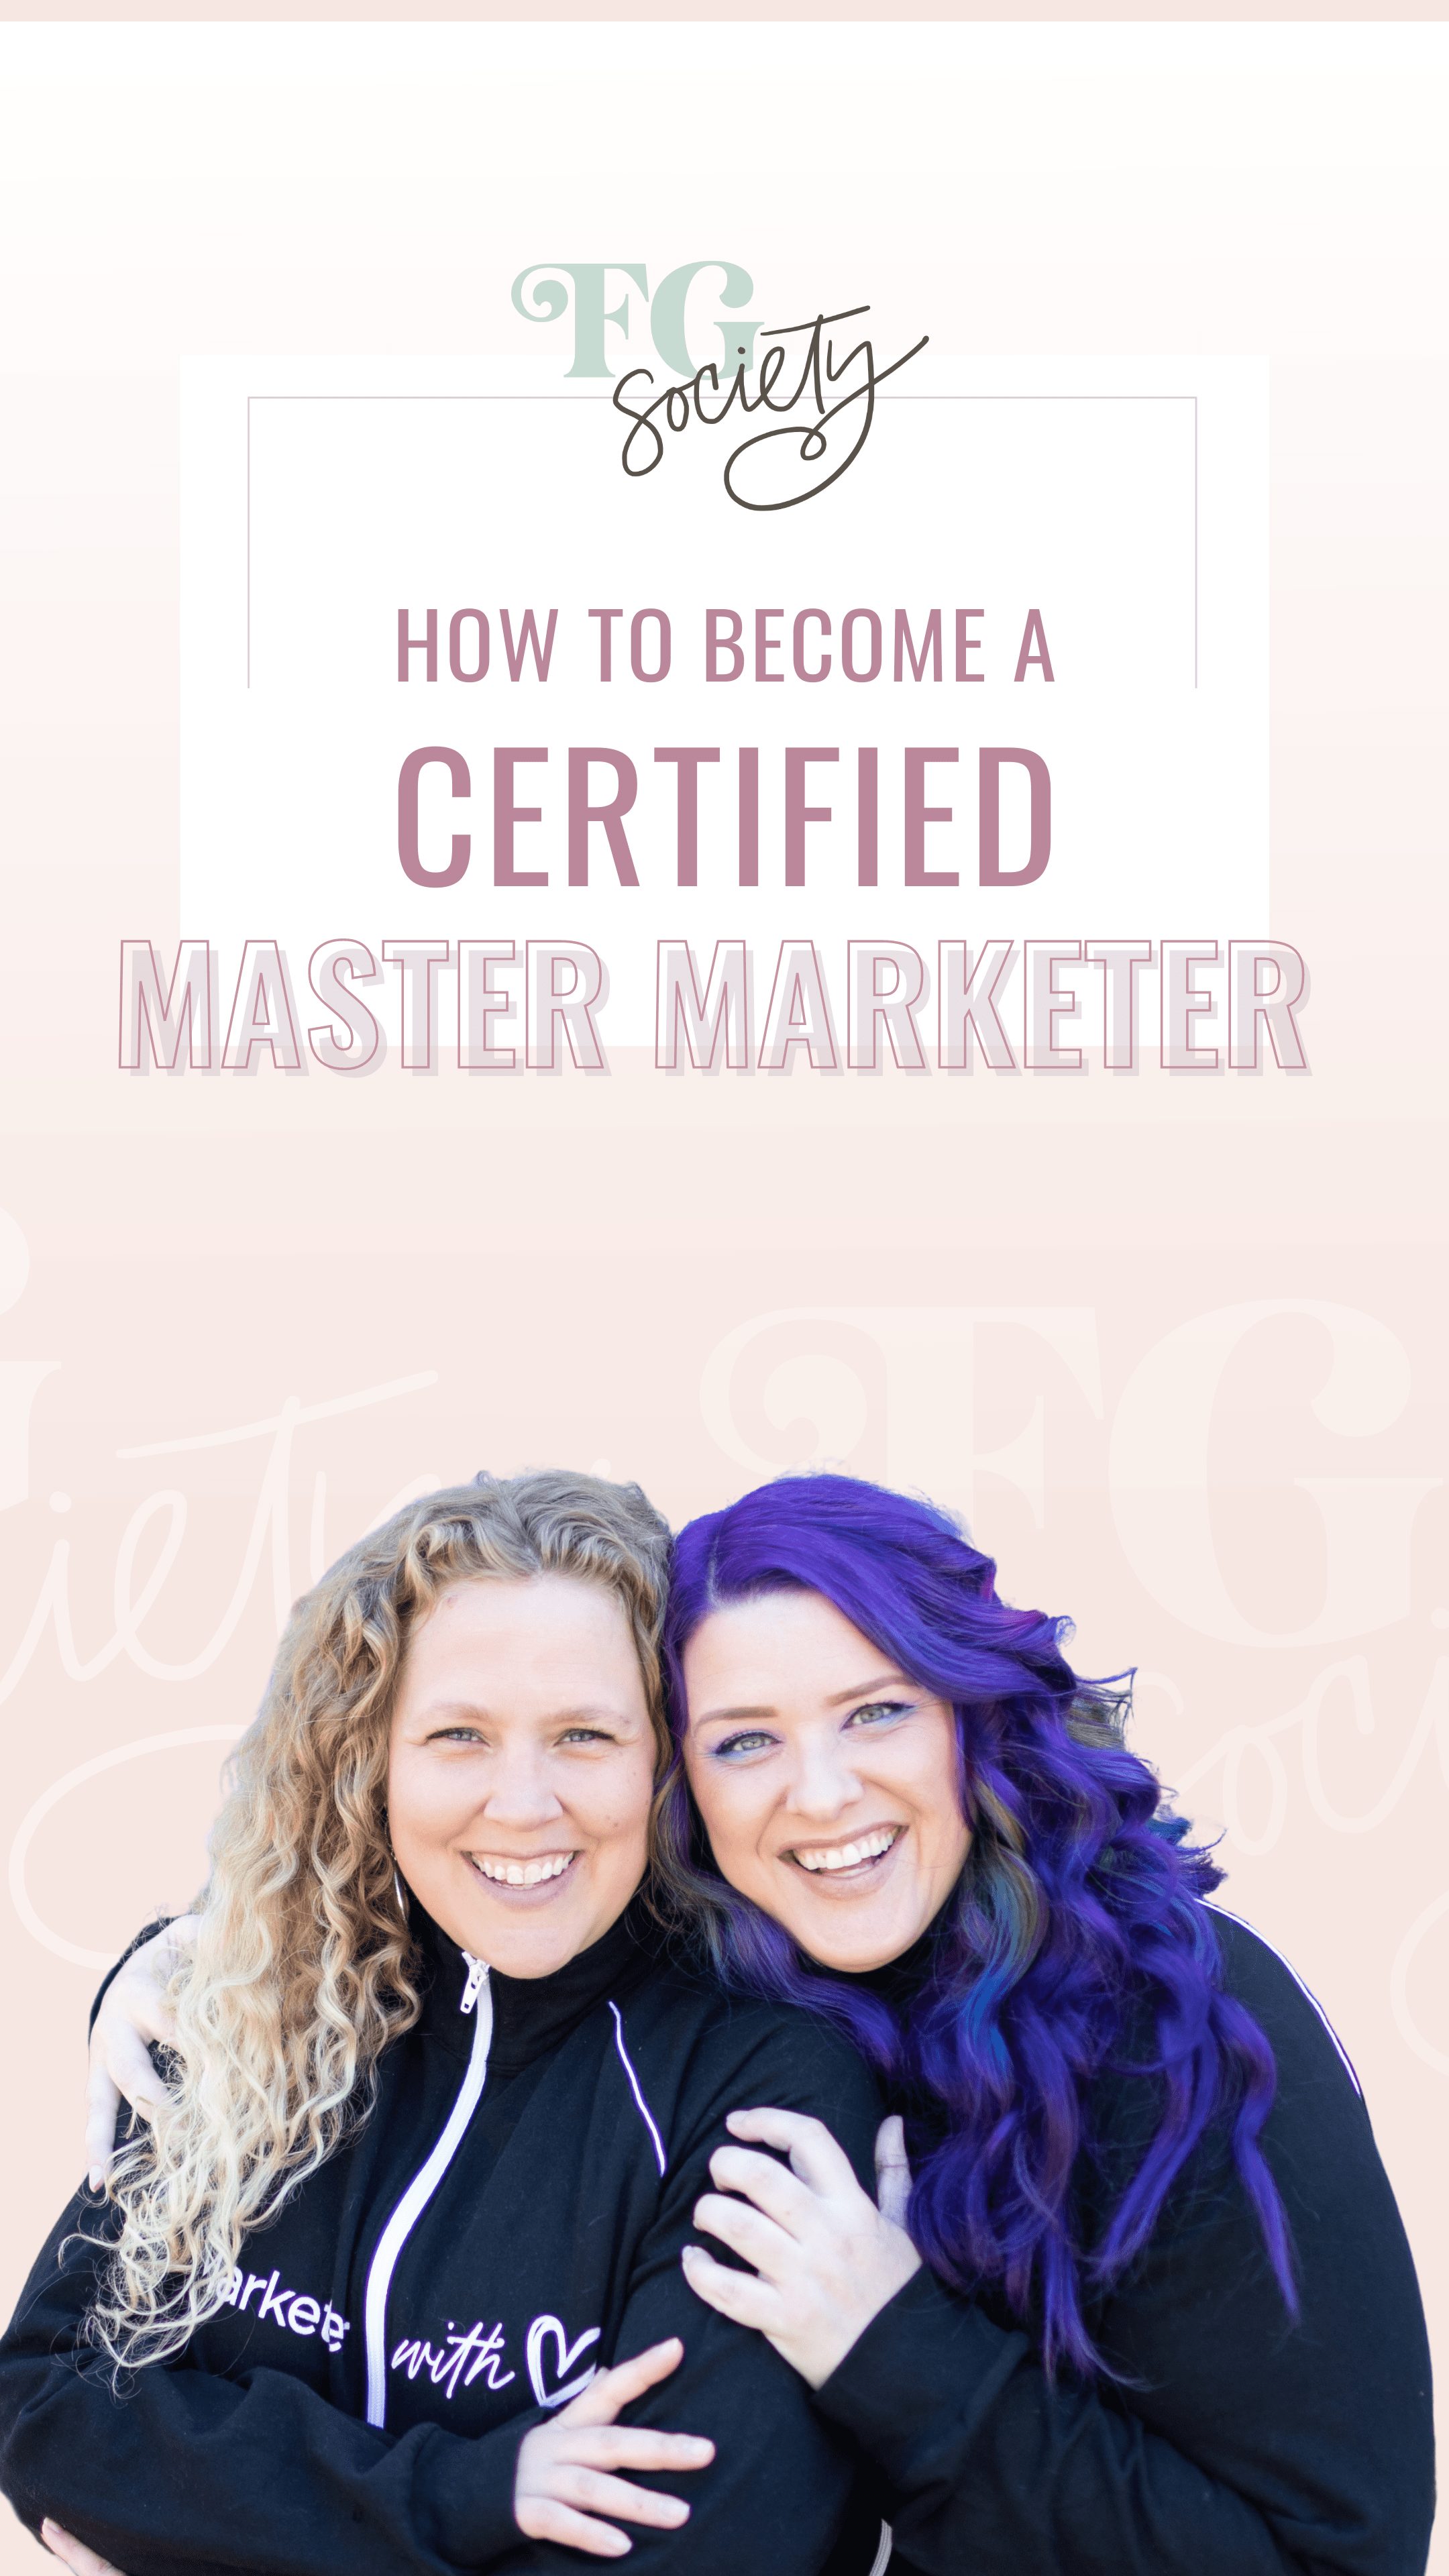 How to Become a Certified Master Marketer